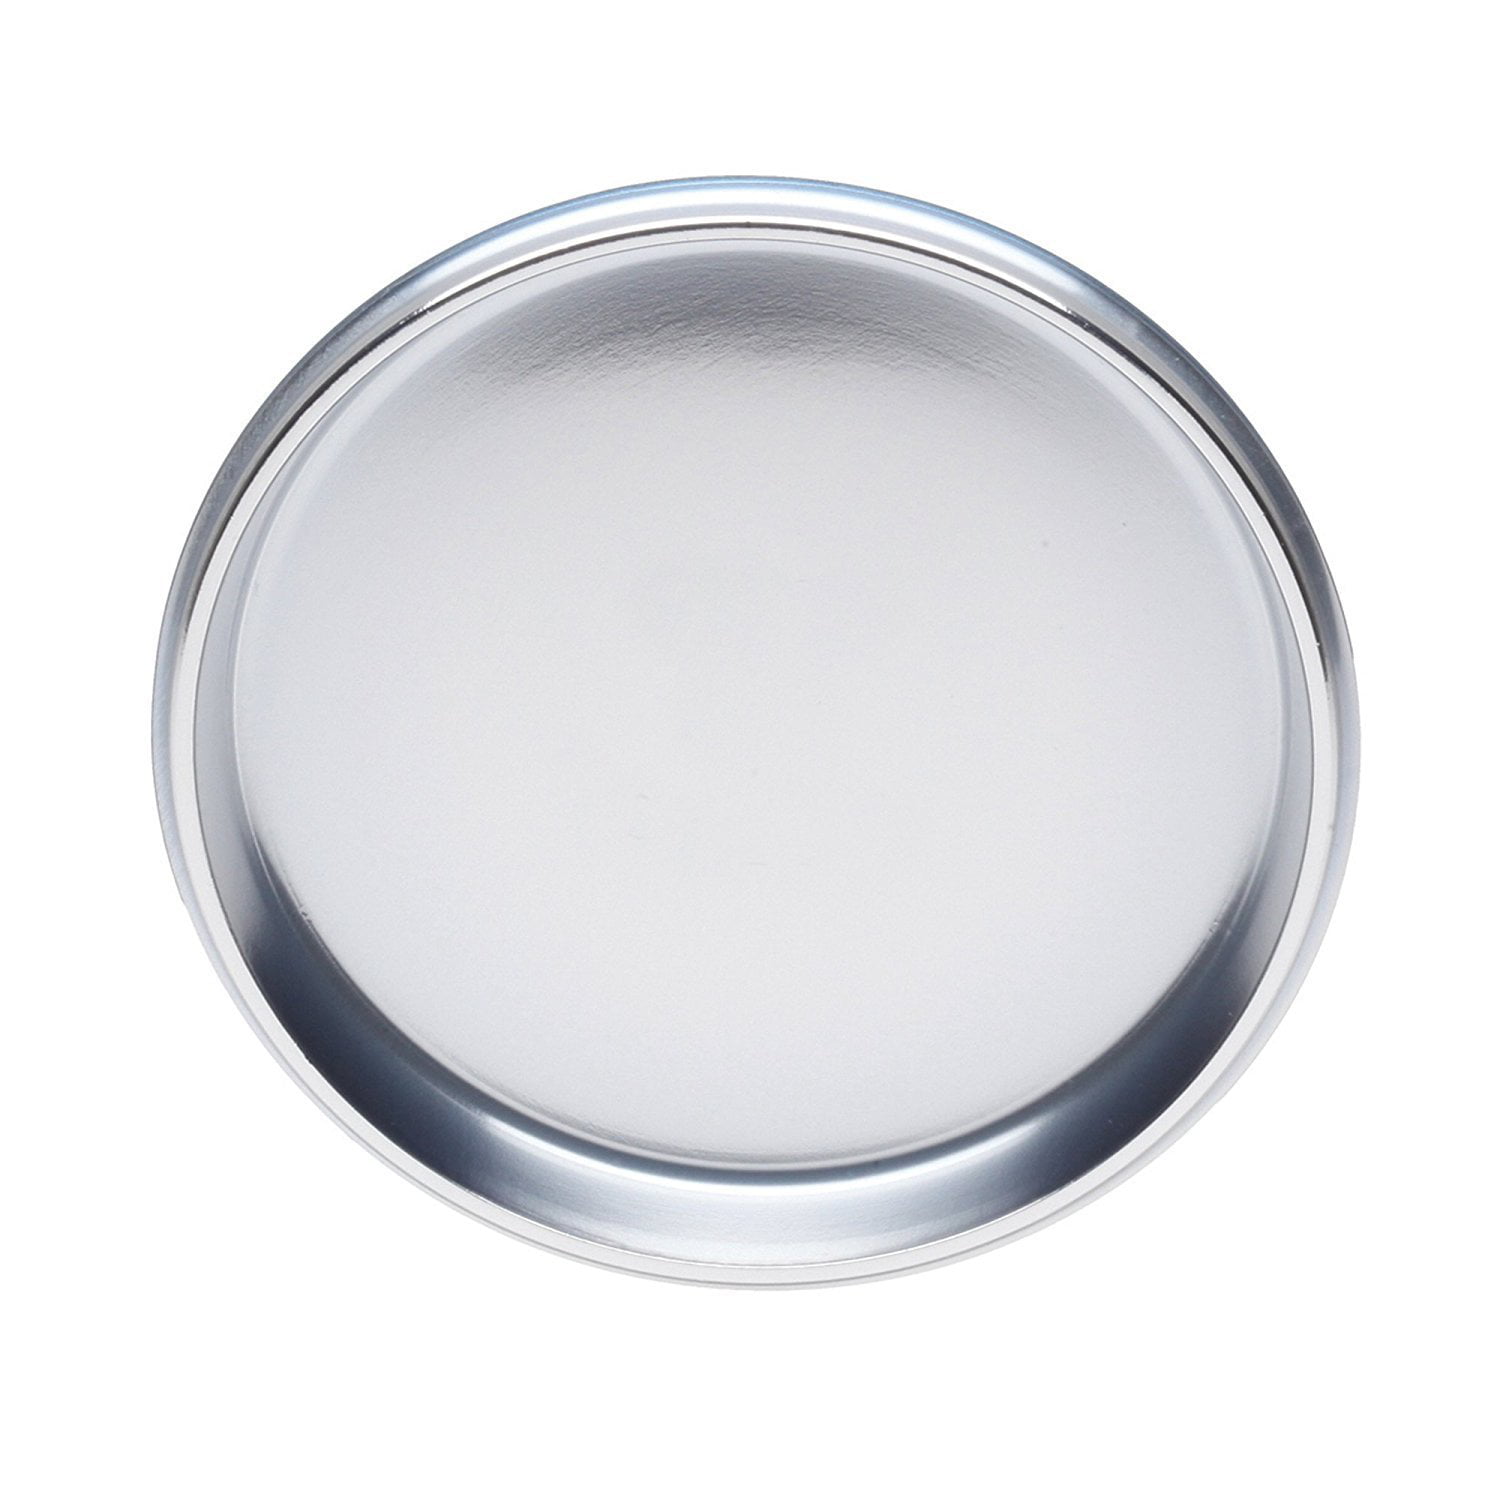 Winco CMT-14 14-Inch Diameter Chrome Plated Round Serving Tray with Engraved Ed 